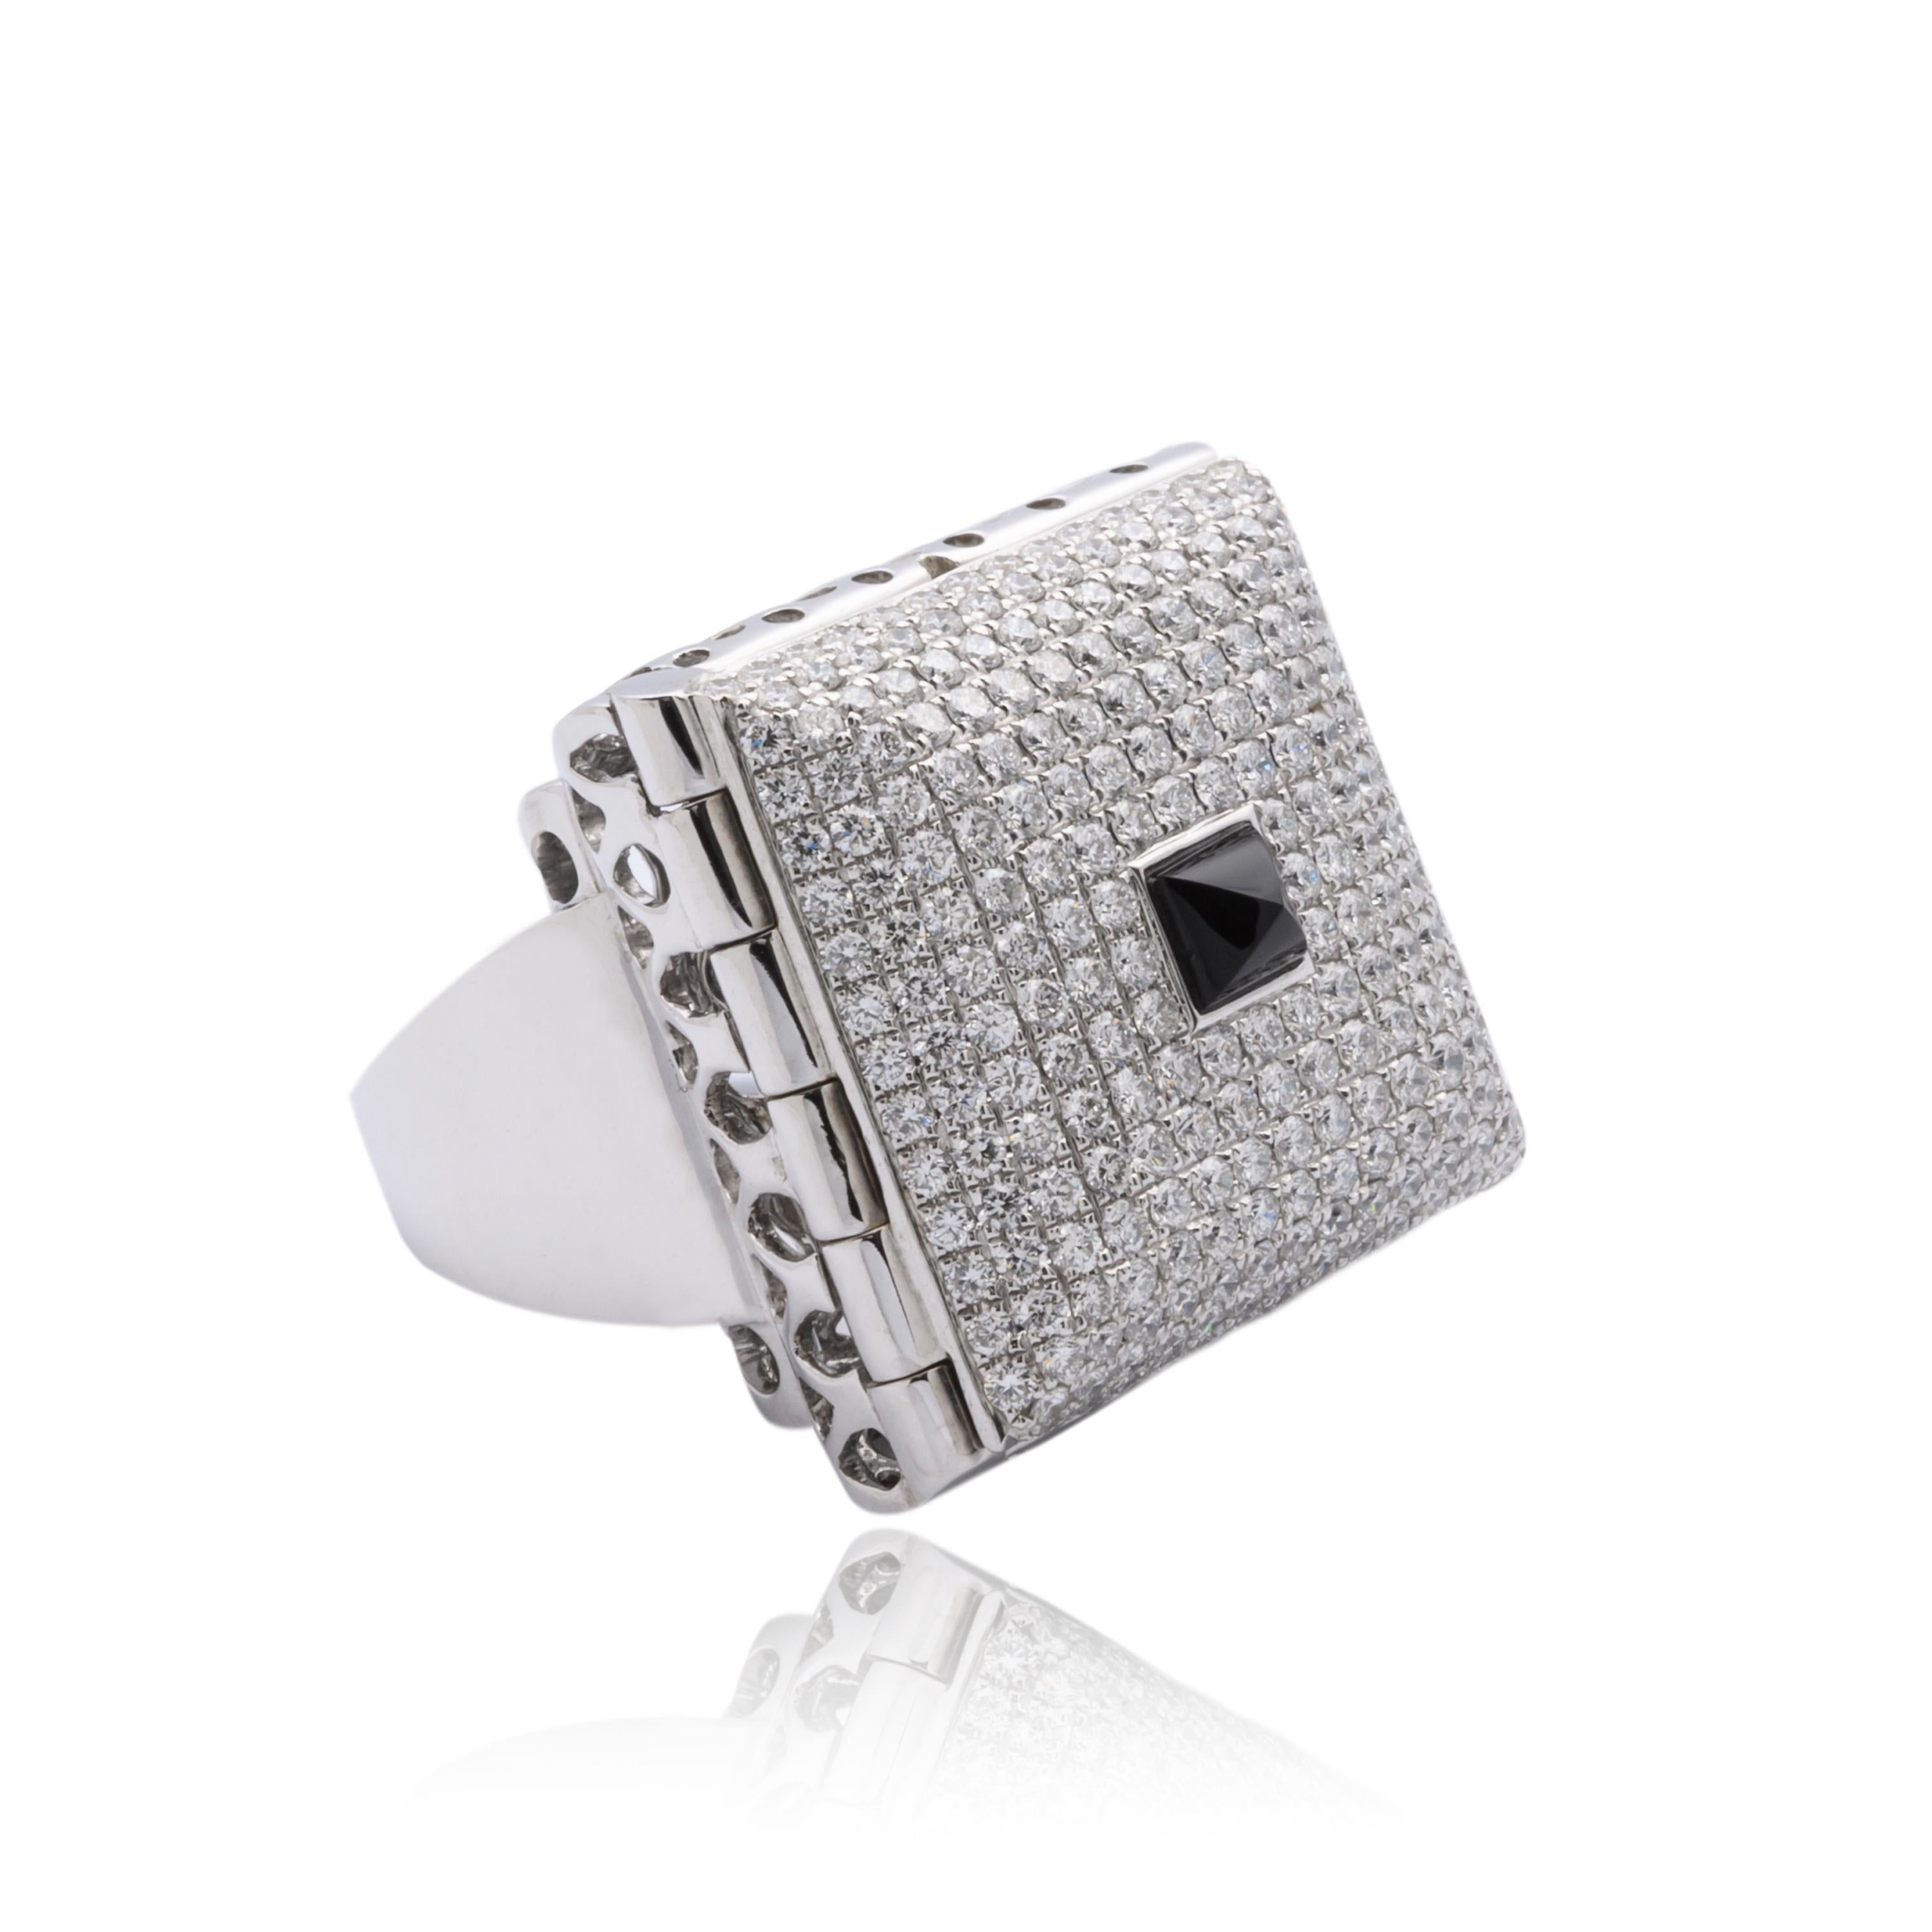 An Order of Bling creates “The Surprise Box of Joy” Ring

Collection: In Whimsy We Play
Diamonds 2.83ct
18K White Gold
Ring Size: HK14.5 / Approx US6.25

Principal designer Sara Sze enjoys creating pieces with the intention of making someone smile.